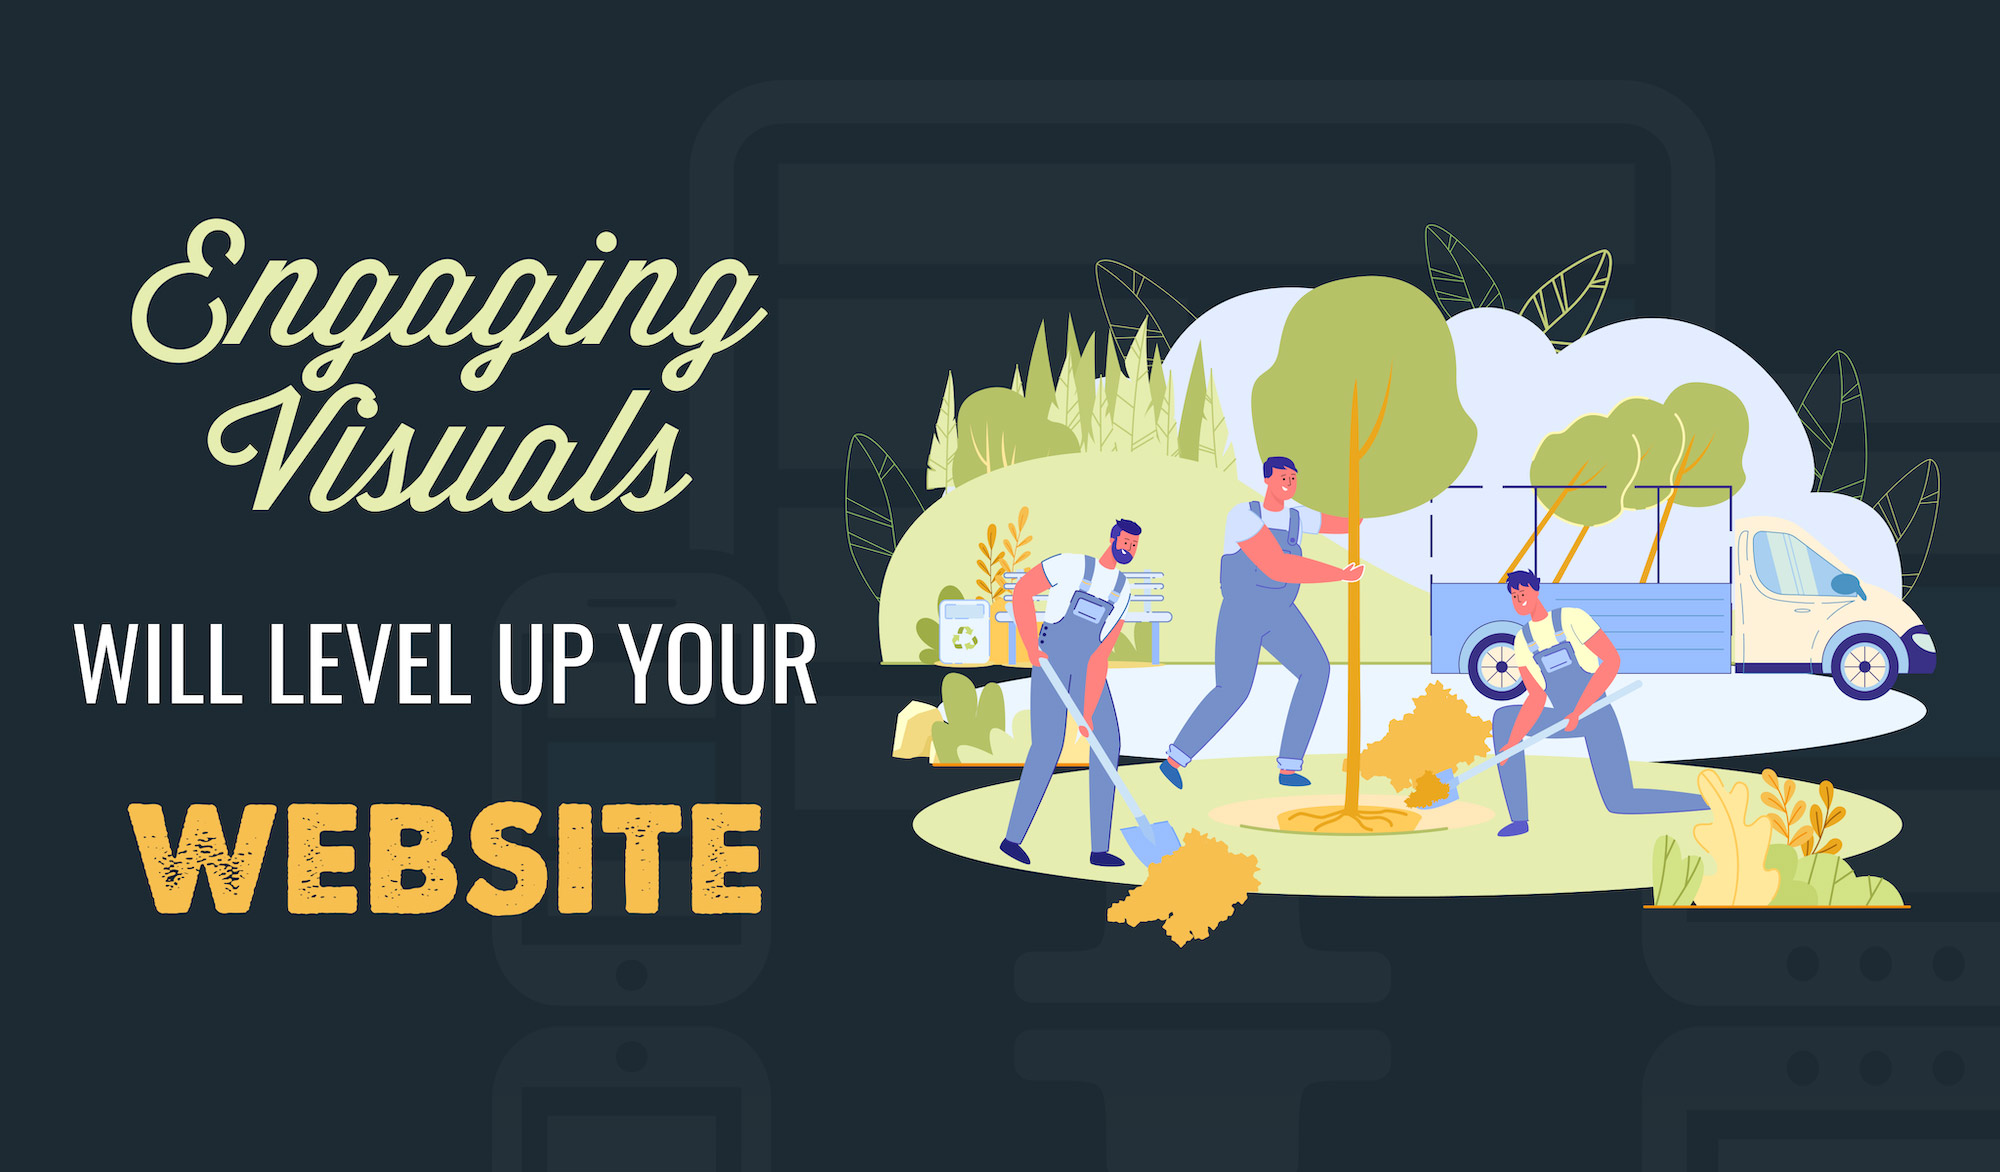 Engaging visuals will level up your website